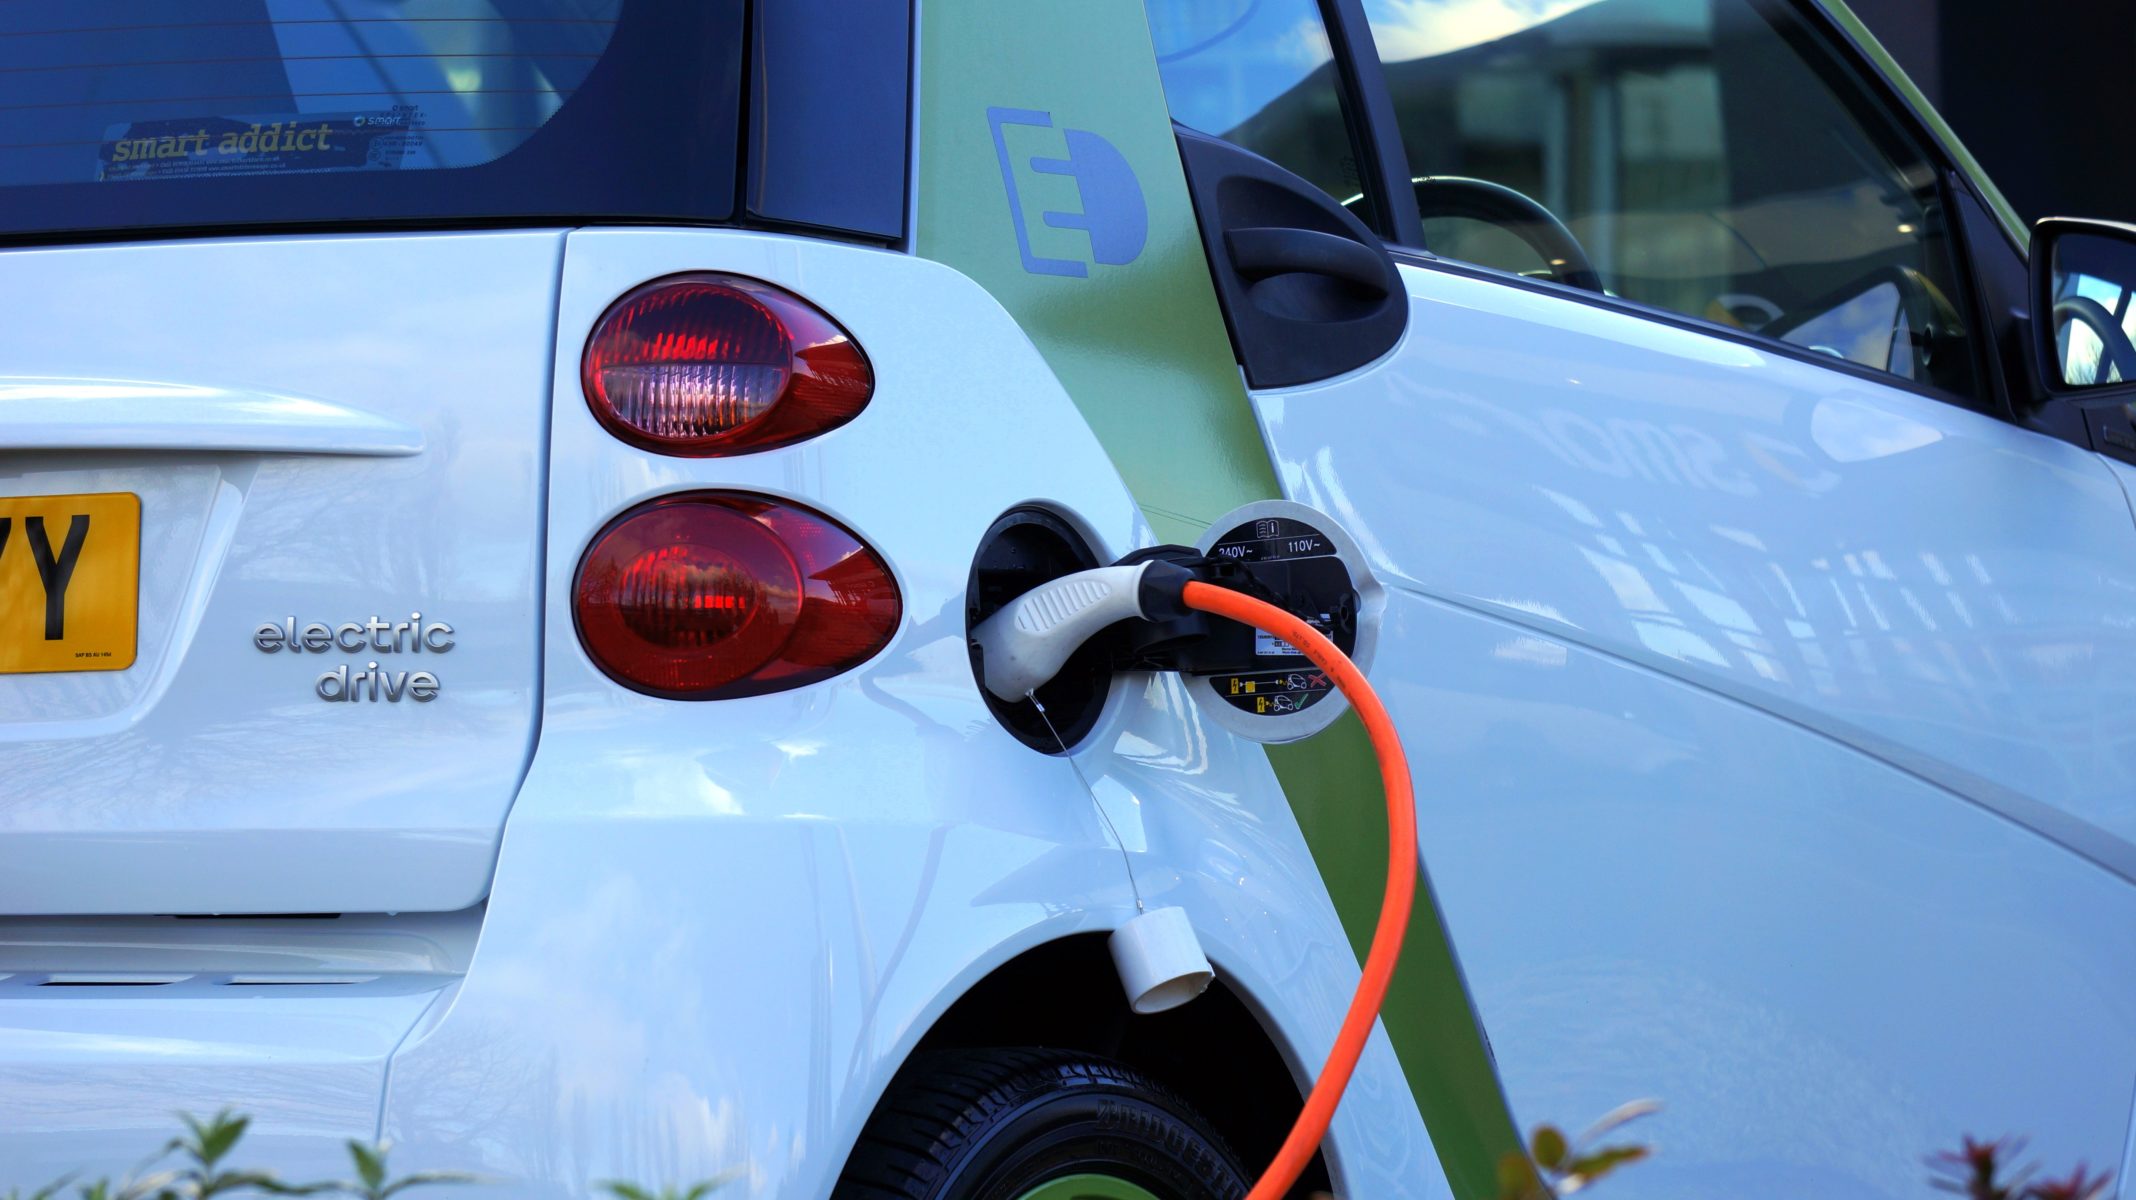 New Quota Rule In China to Lift EV Producers & Battery Makers